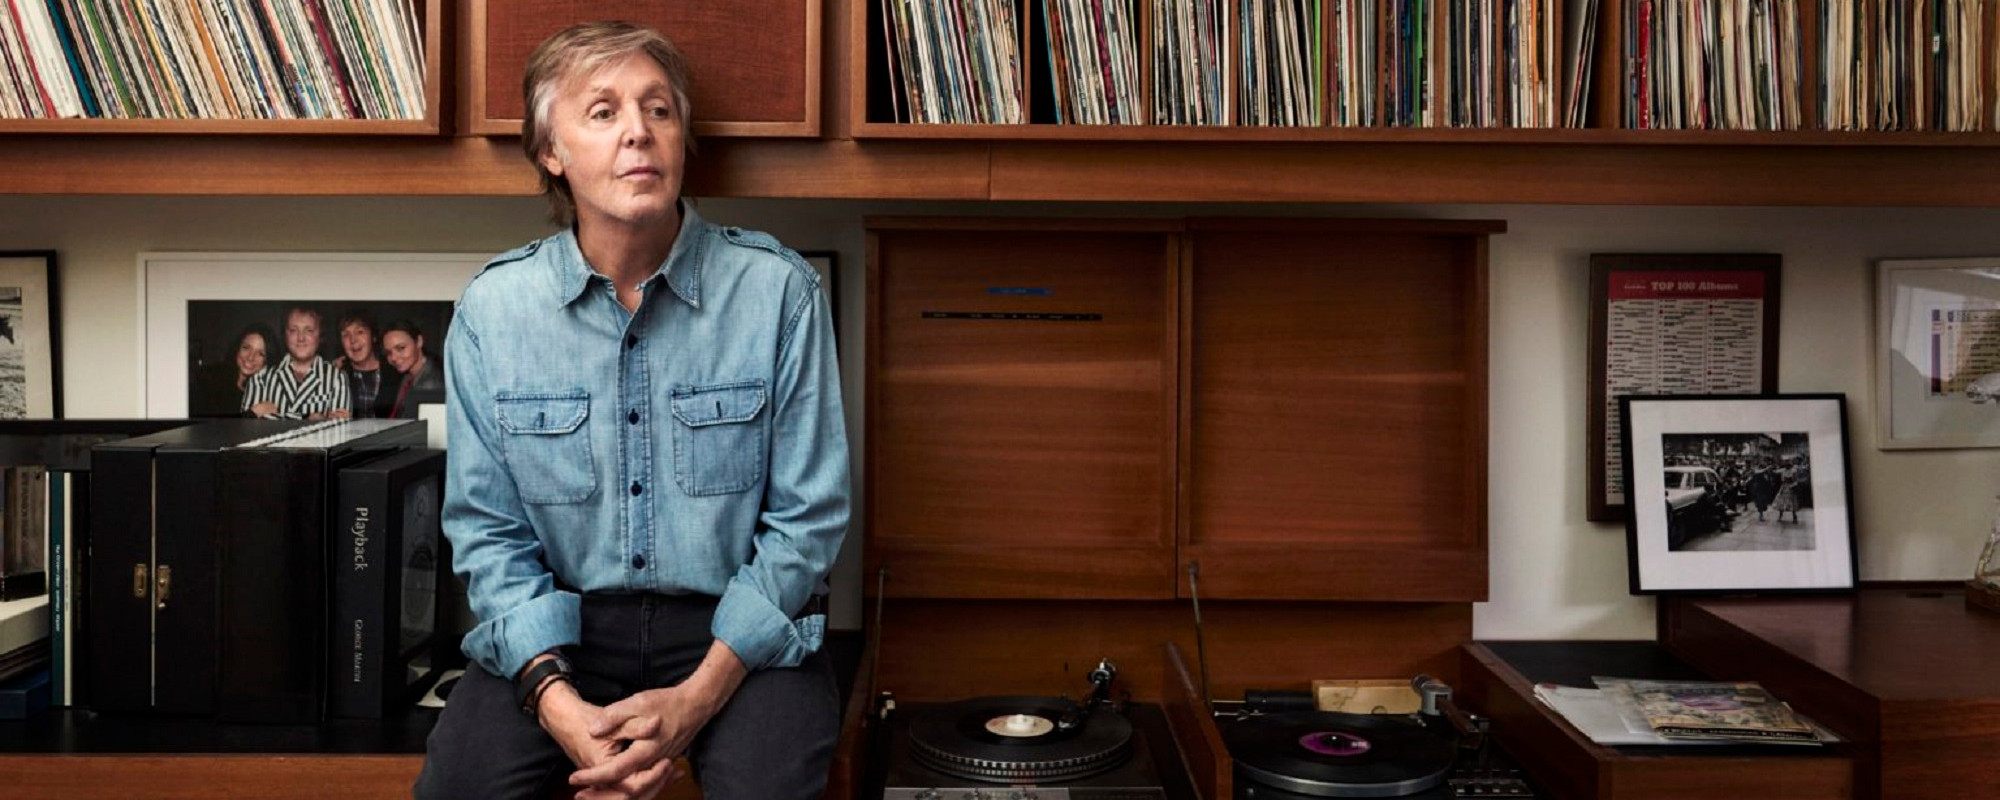 MusiCares Charity Auction Features Collectibles from Paul McCartney, Christine McVie, Slash & More